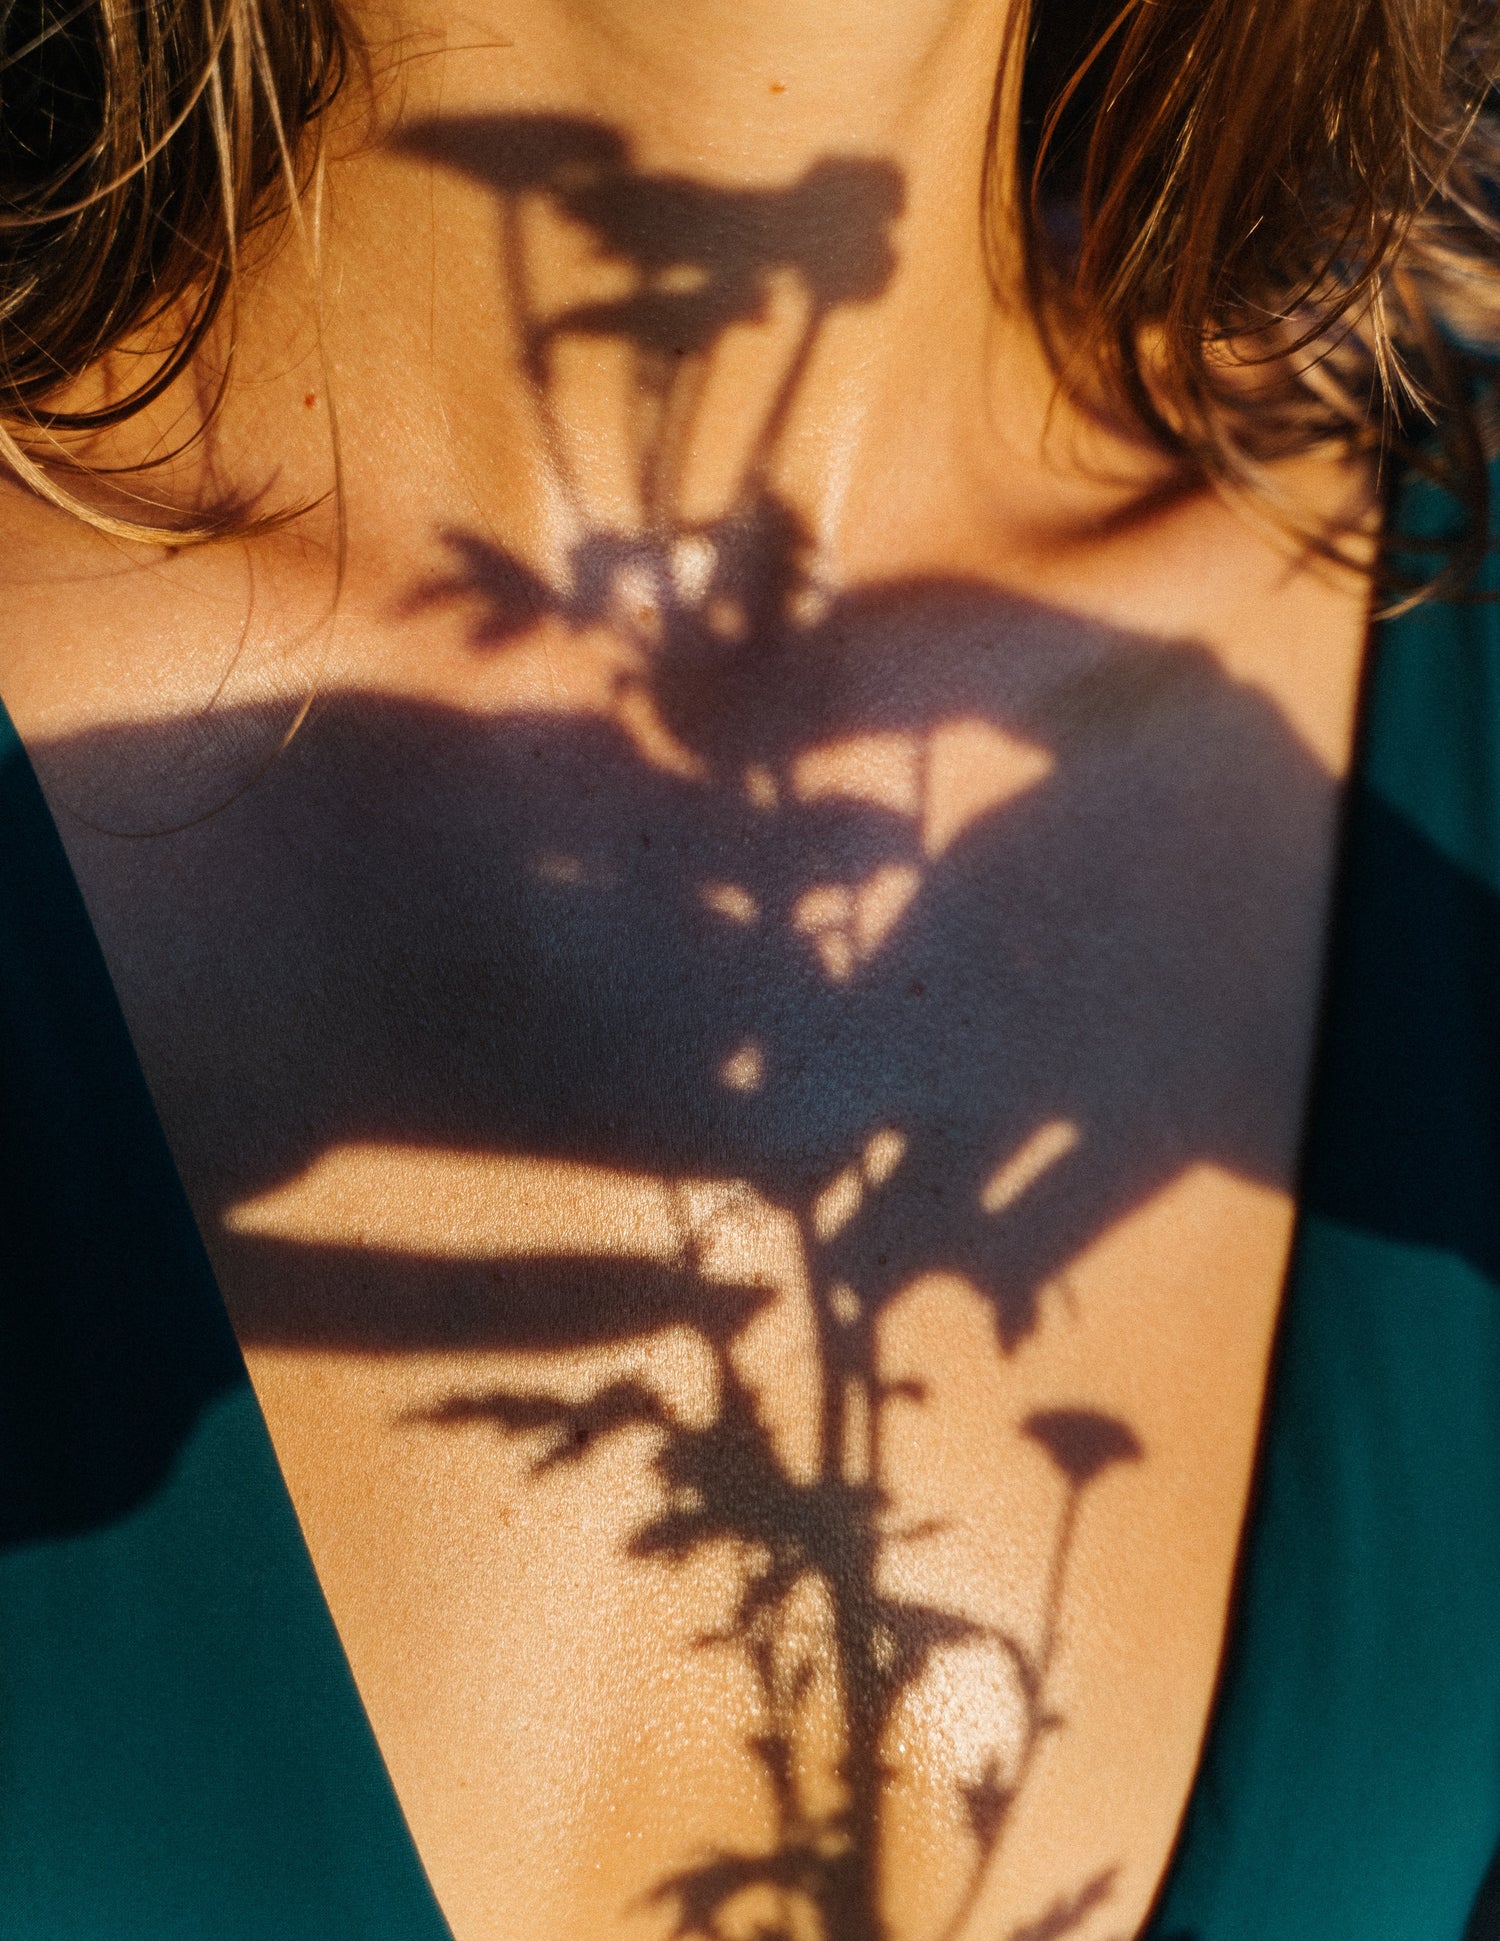 The chest of a woman with the shadow of a plant